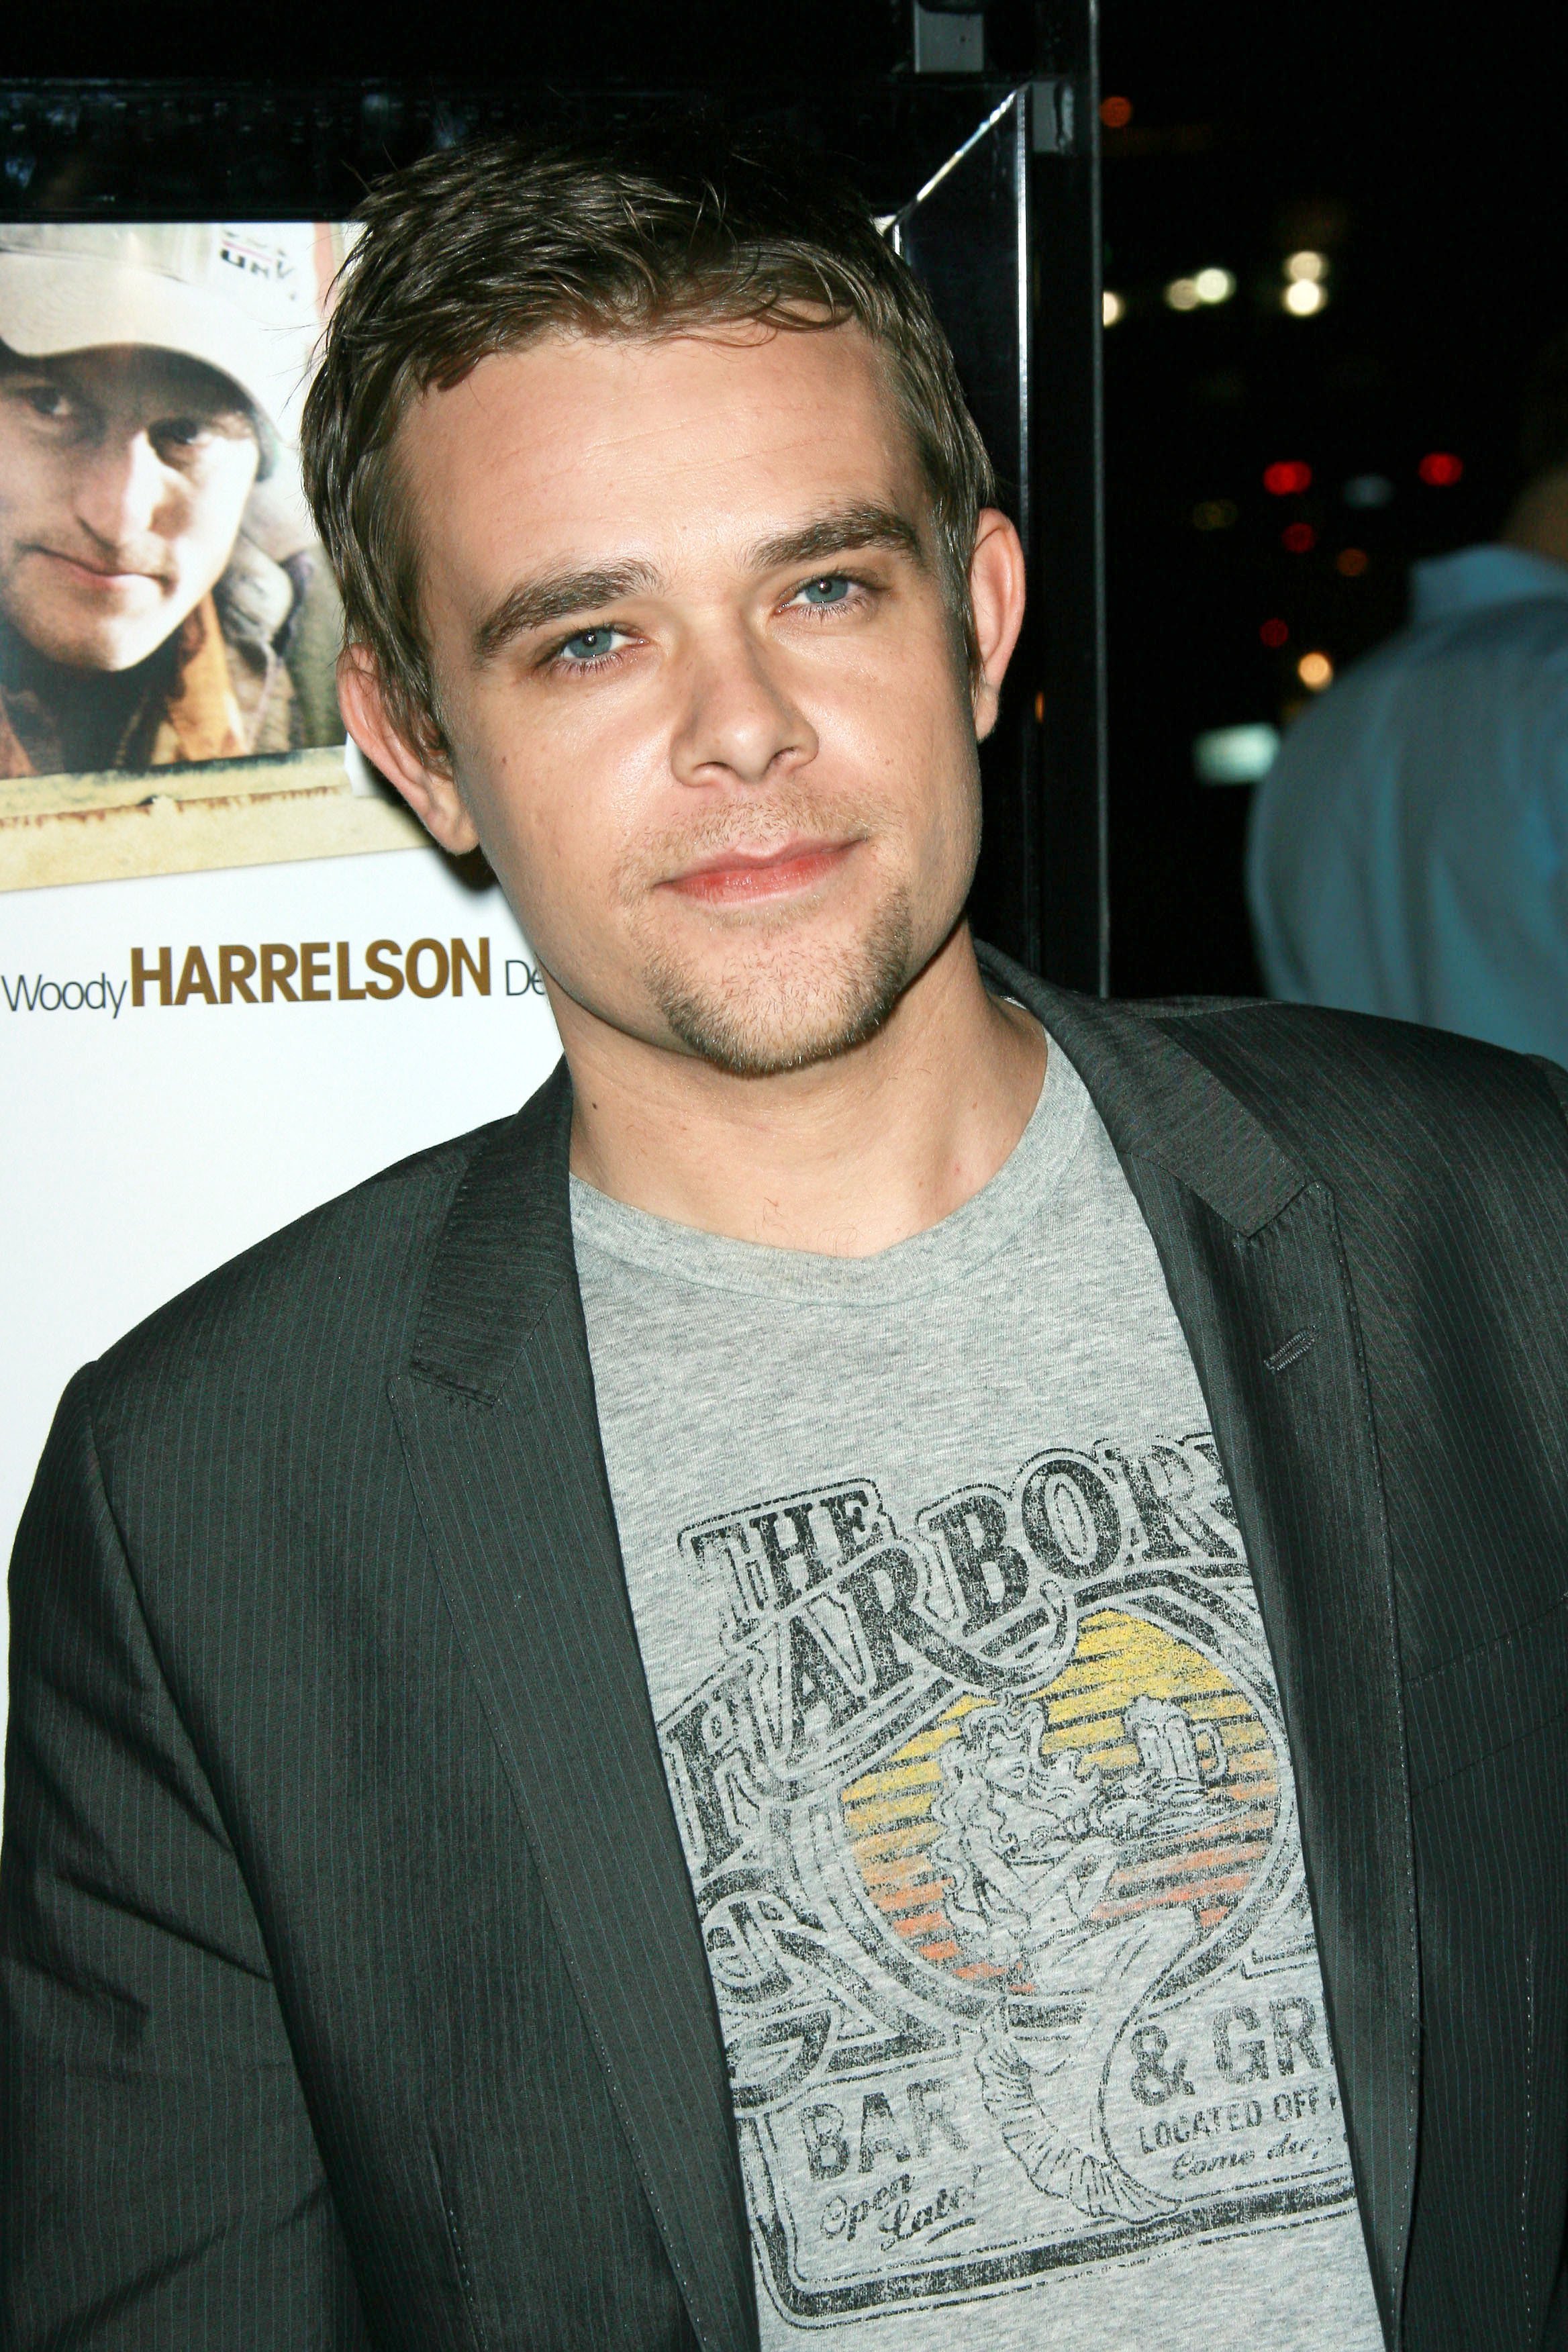 Nick Stahl at the Sleepwalking Premiere held at the Directors Guild of America, Hollywood | Photo: Shutterstock